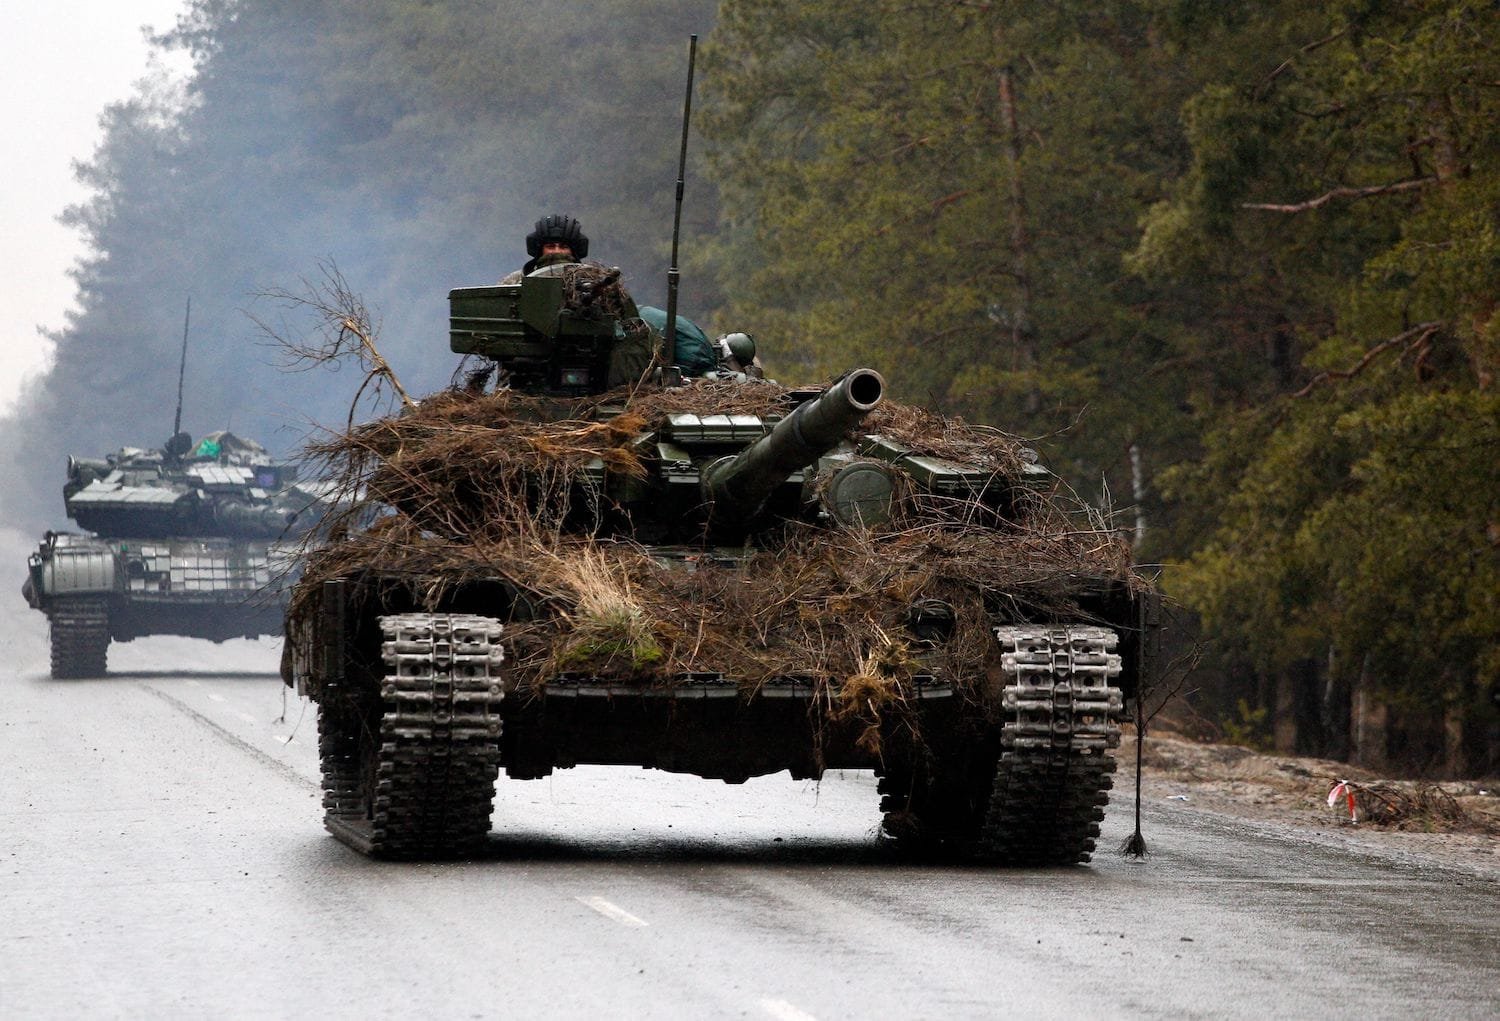 NATO Allies sends heavy weapons to Ukraine. Russia claims this is World War III.